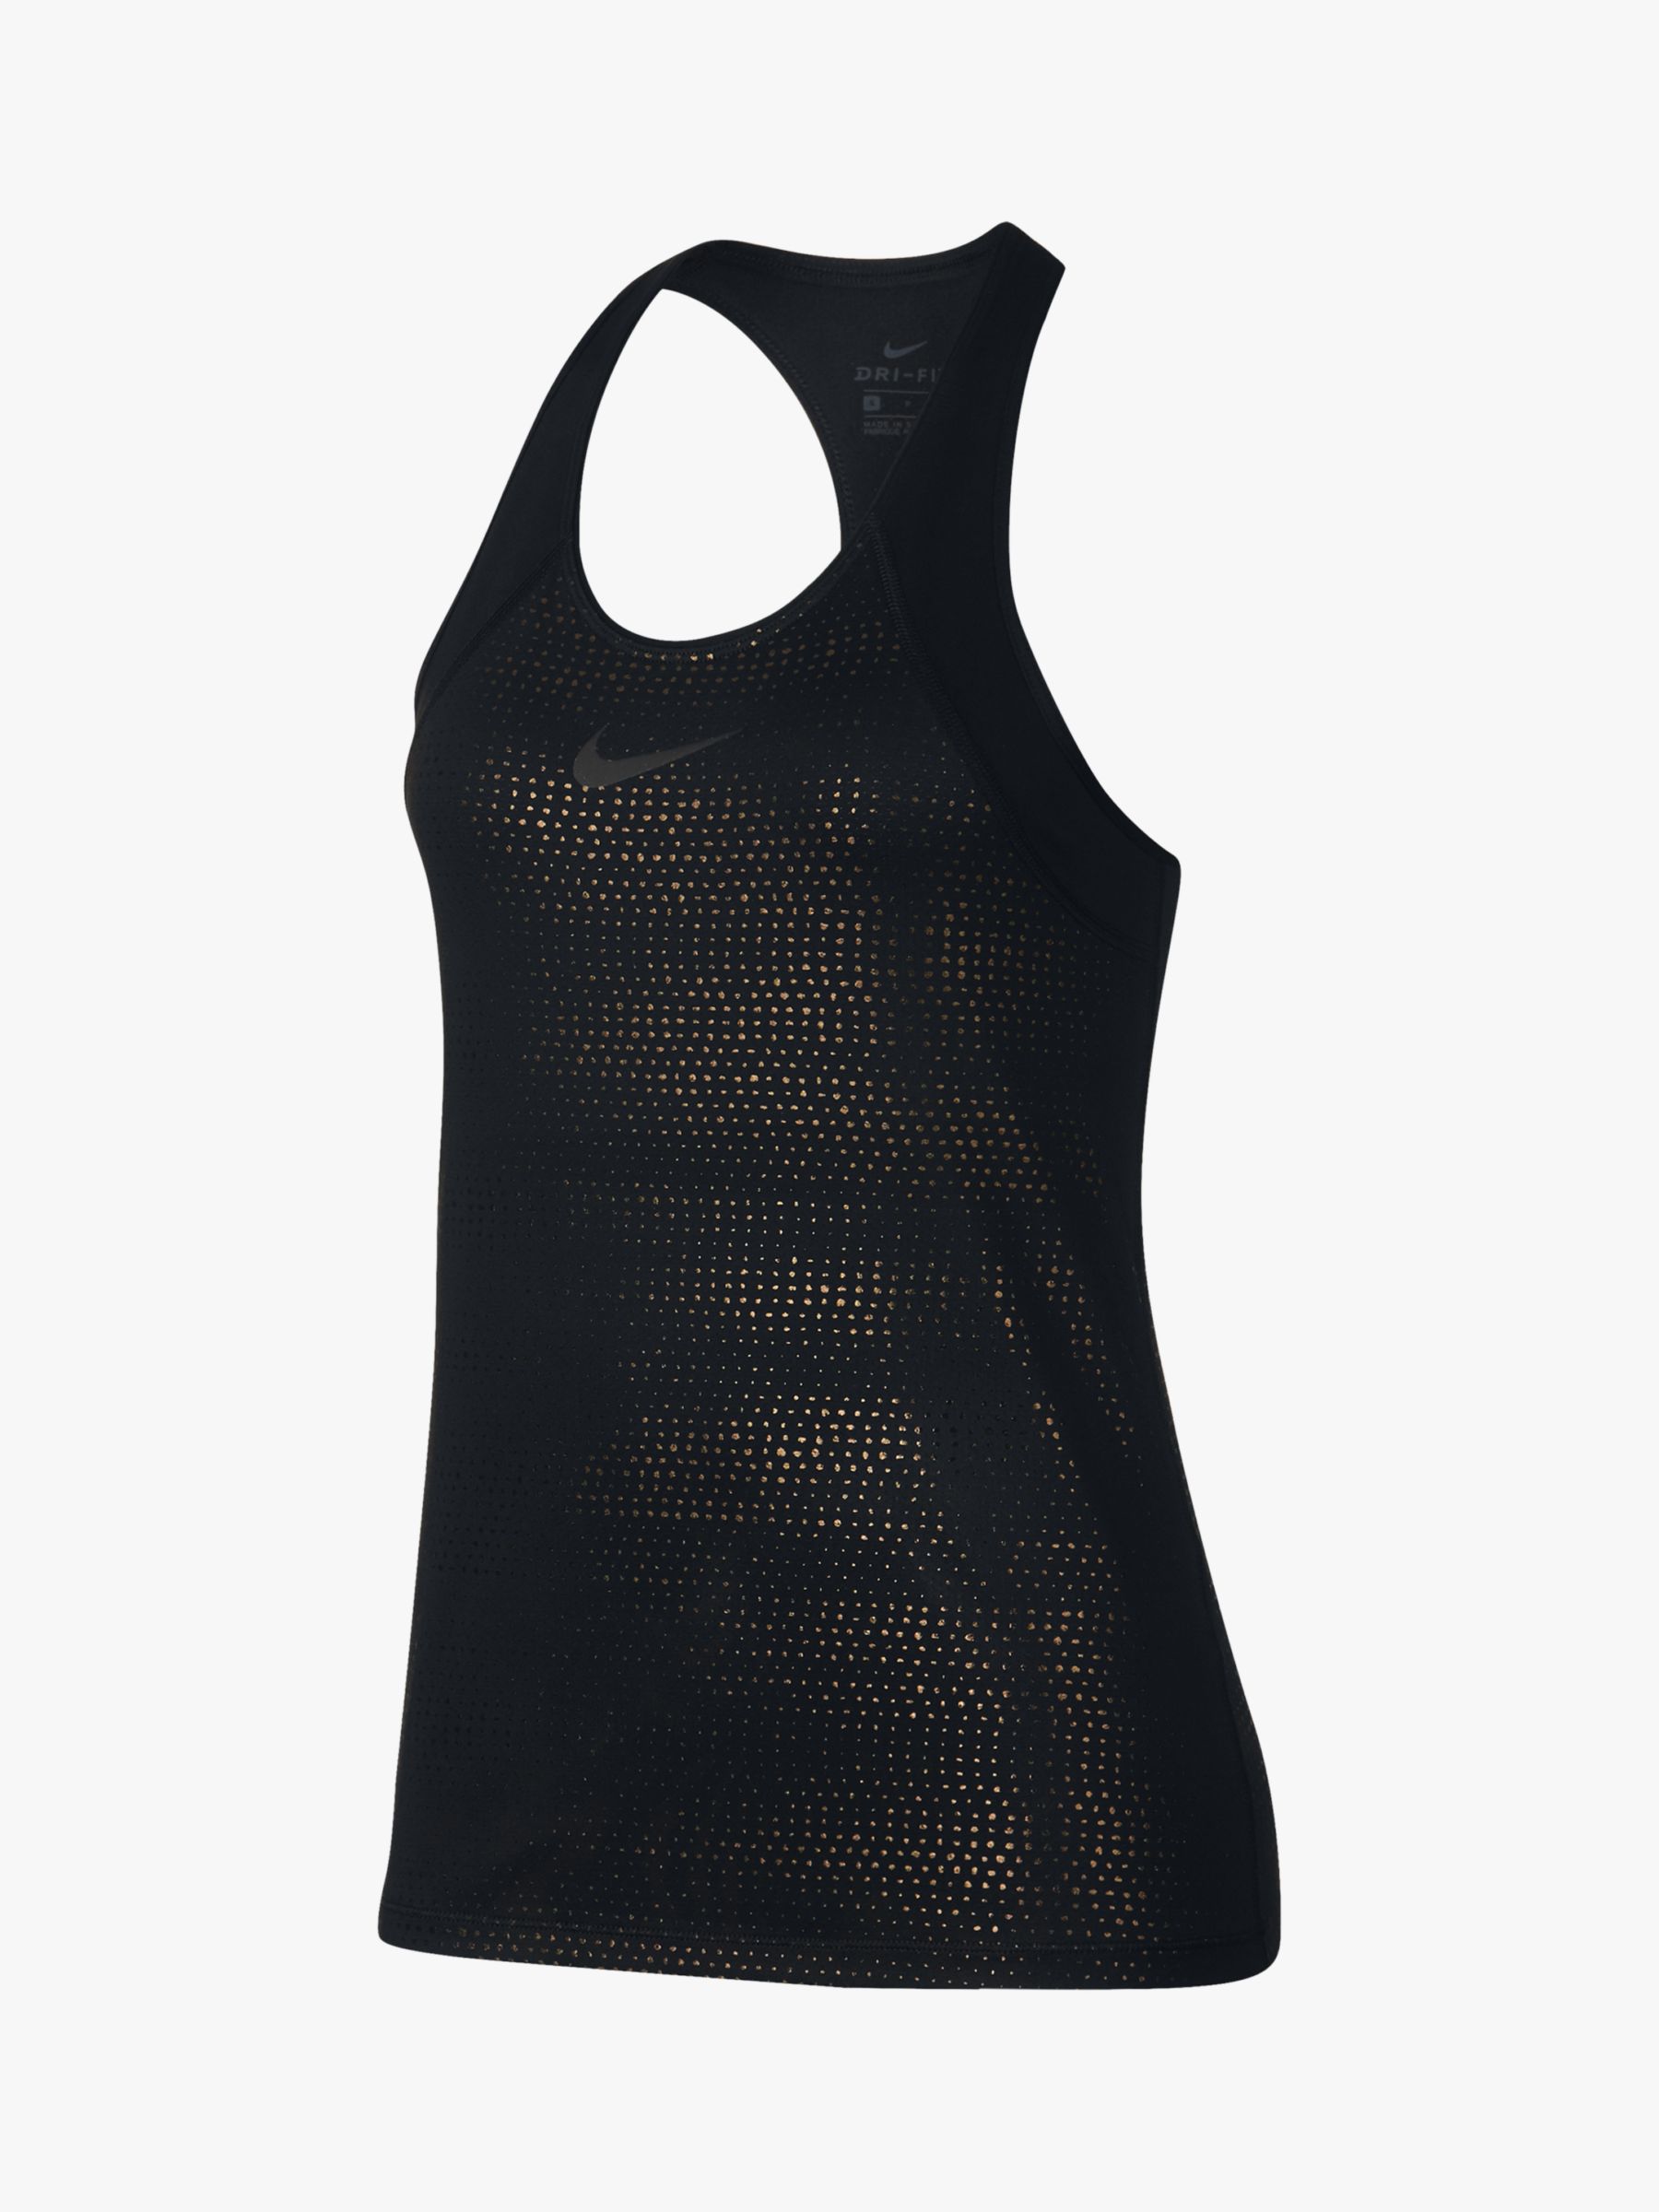 black and gold nike tank top